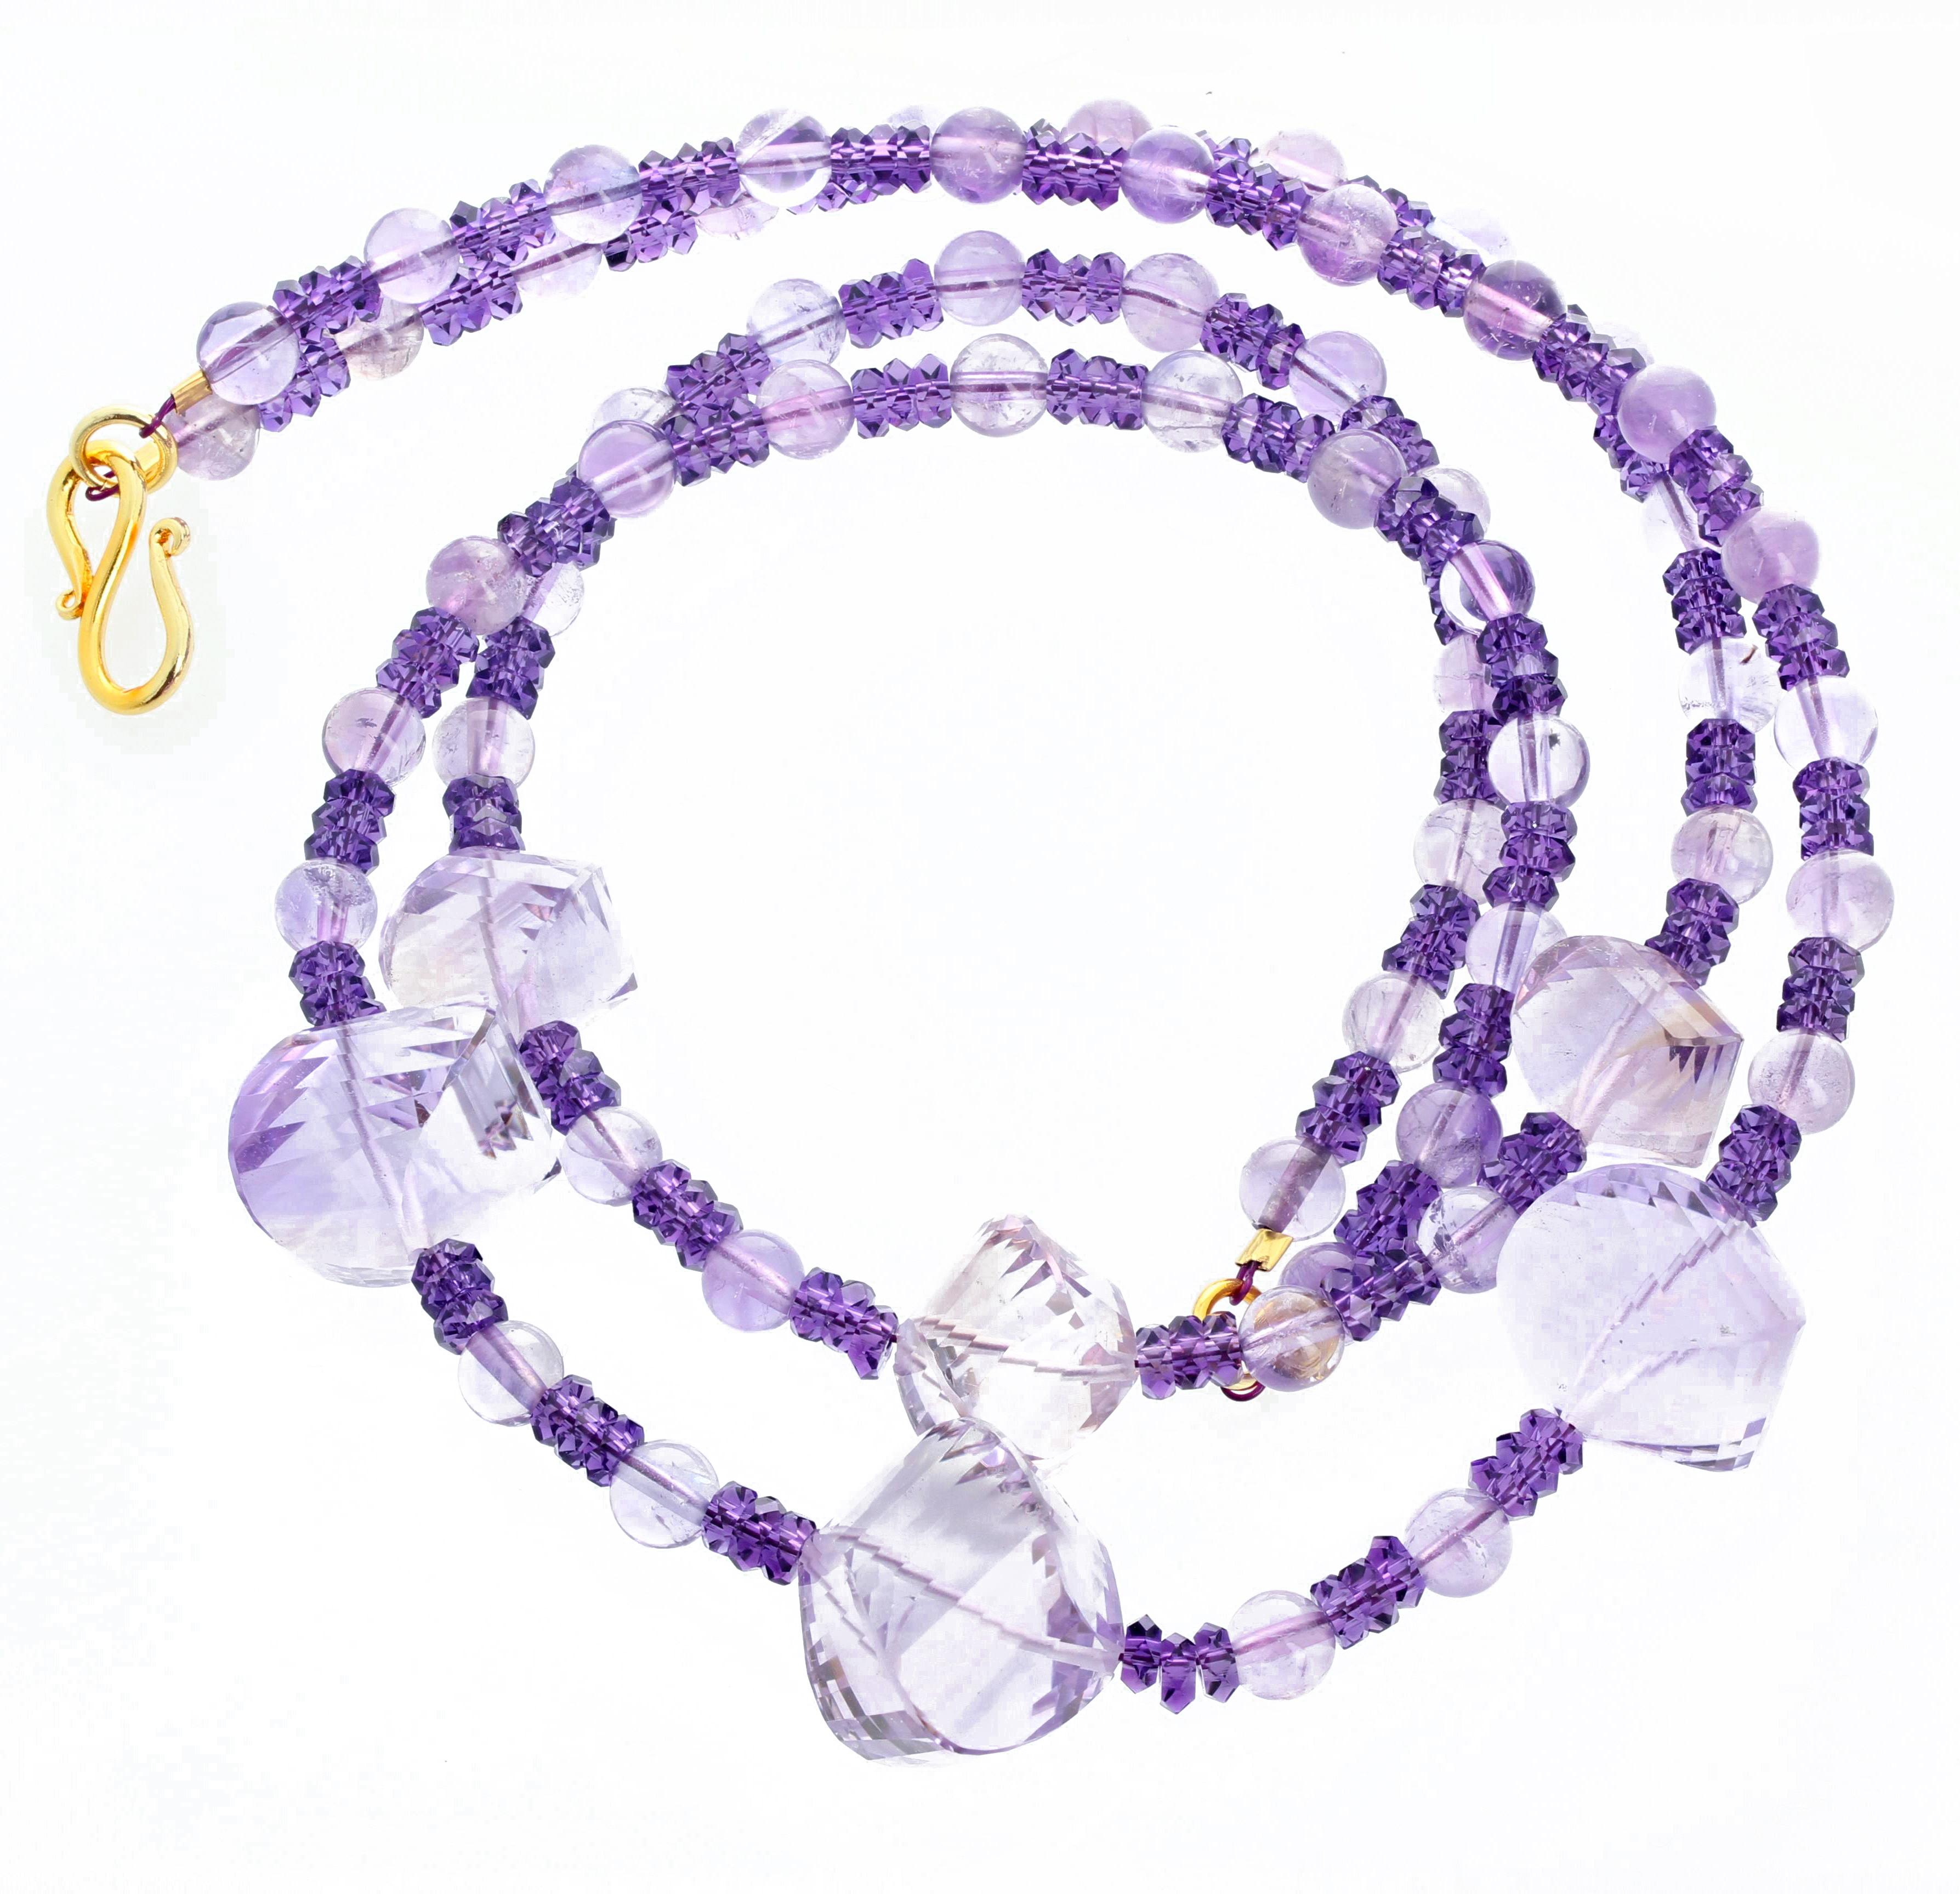 This AJD unique double strand of highly polished glittering Rose of France Amethysts are enhanced with round polished Rose of France and accented with bright gem cut glittering Amethyst rondels set in this 16 inch long necklace.  The largest